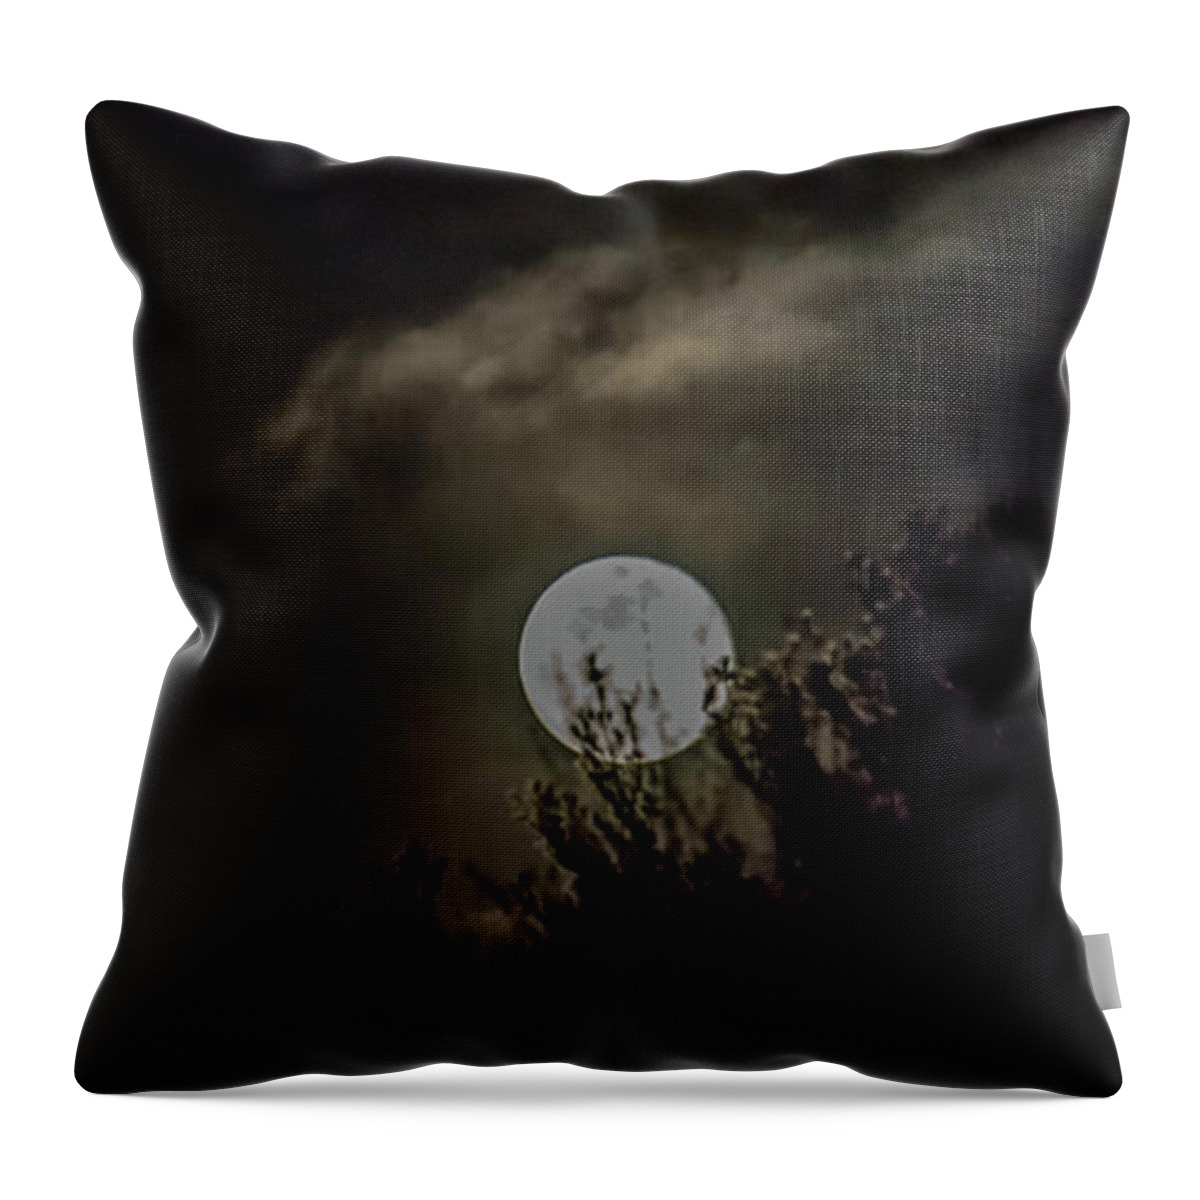  Throw Pillow featuring the photograph Amy Blue Moon by Brian MacLean